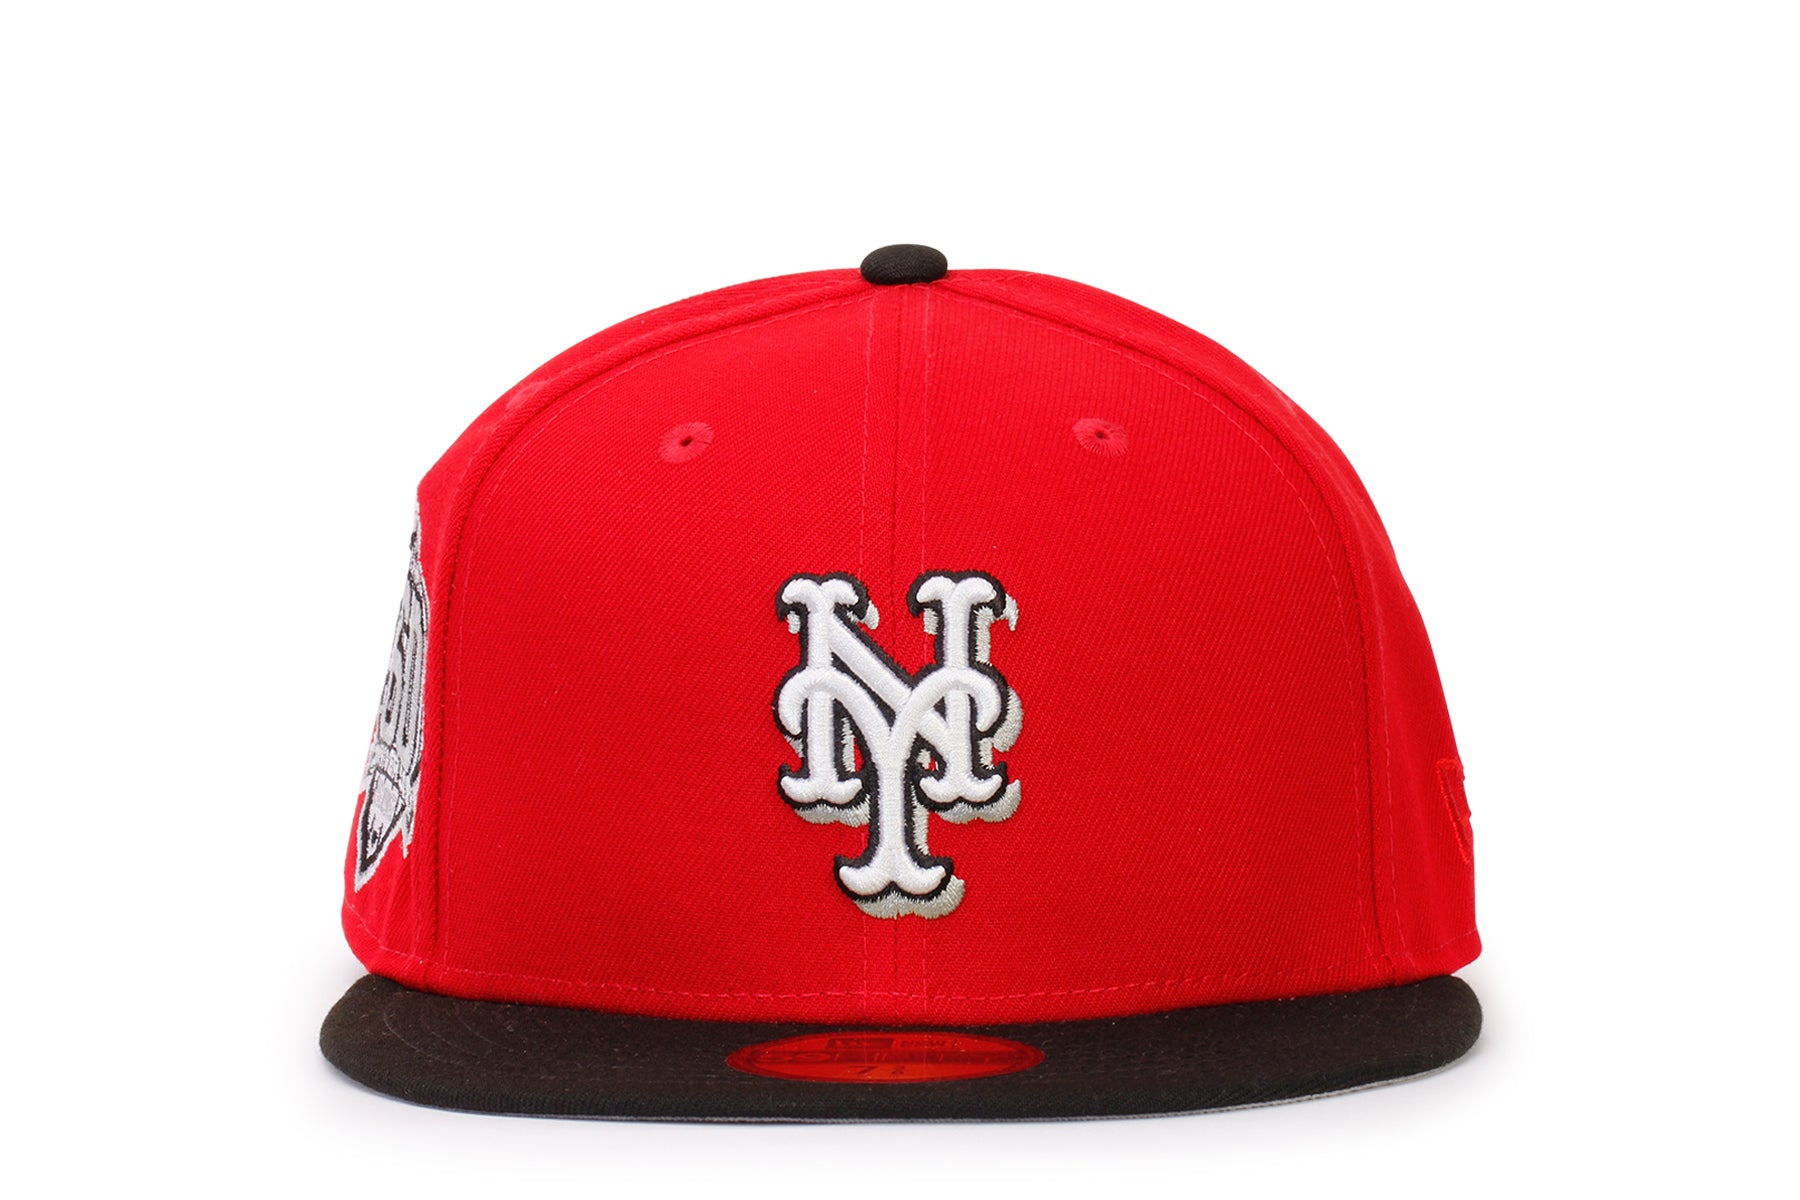 59fifty black red fitted hat